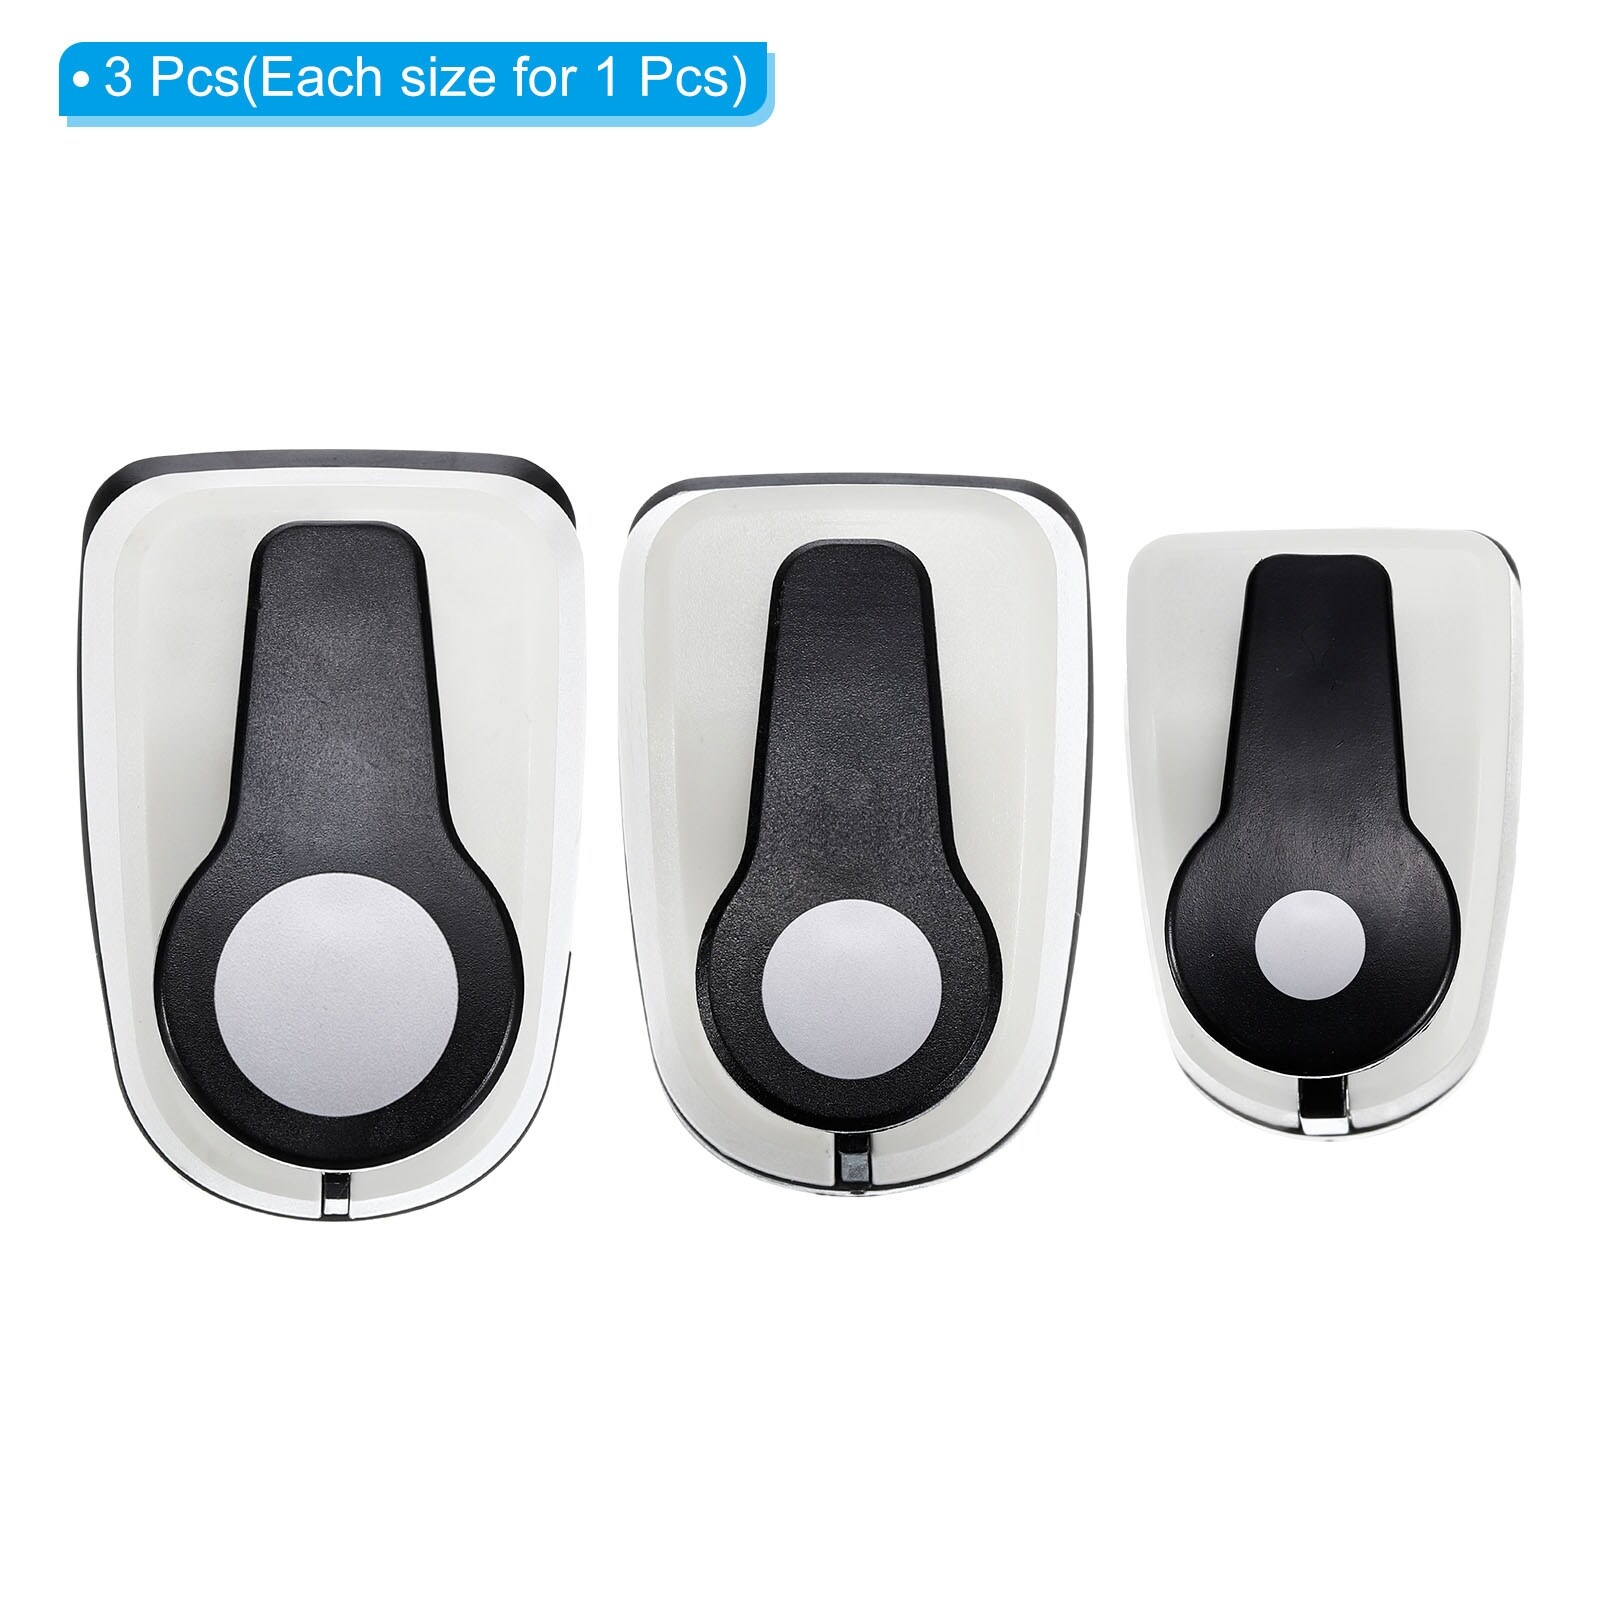 0.4 & 0.6 & 1 Inch Circle Punch, Hole Paper Punch Hole Puncher